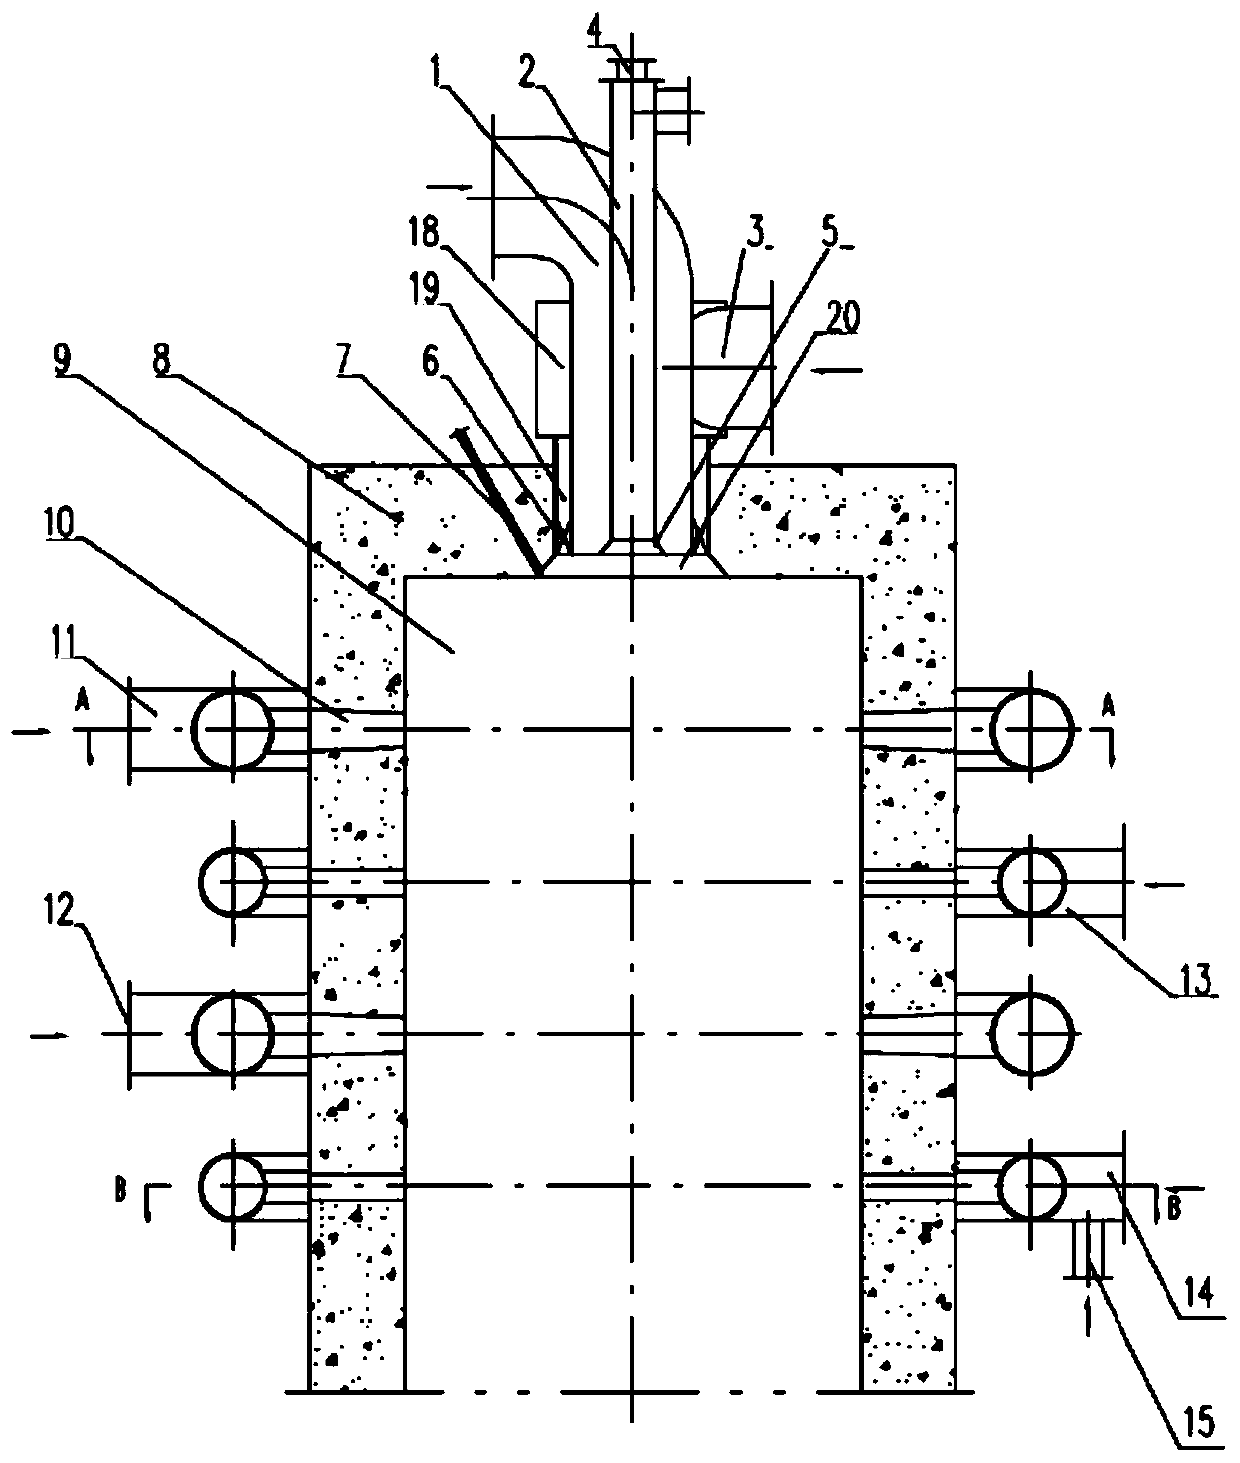 Low-nitrogen combustion process and device combining direct flow with rotational flow and supplying air at multiple stages in hearth